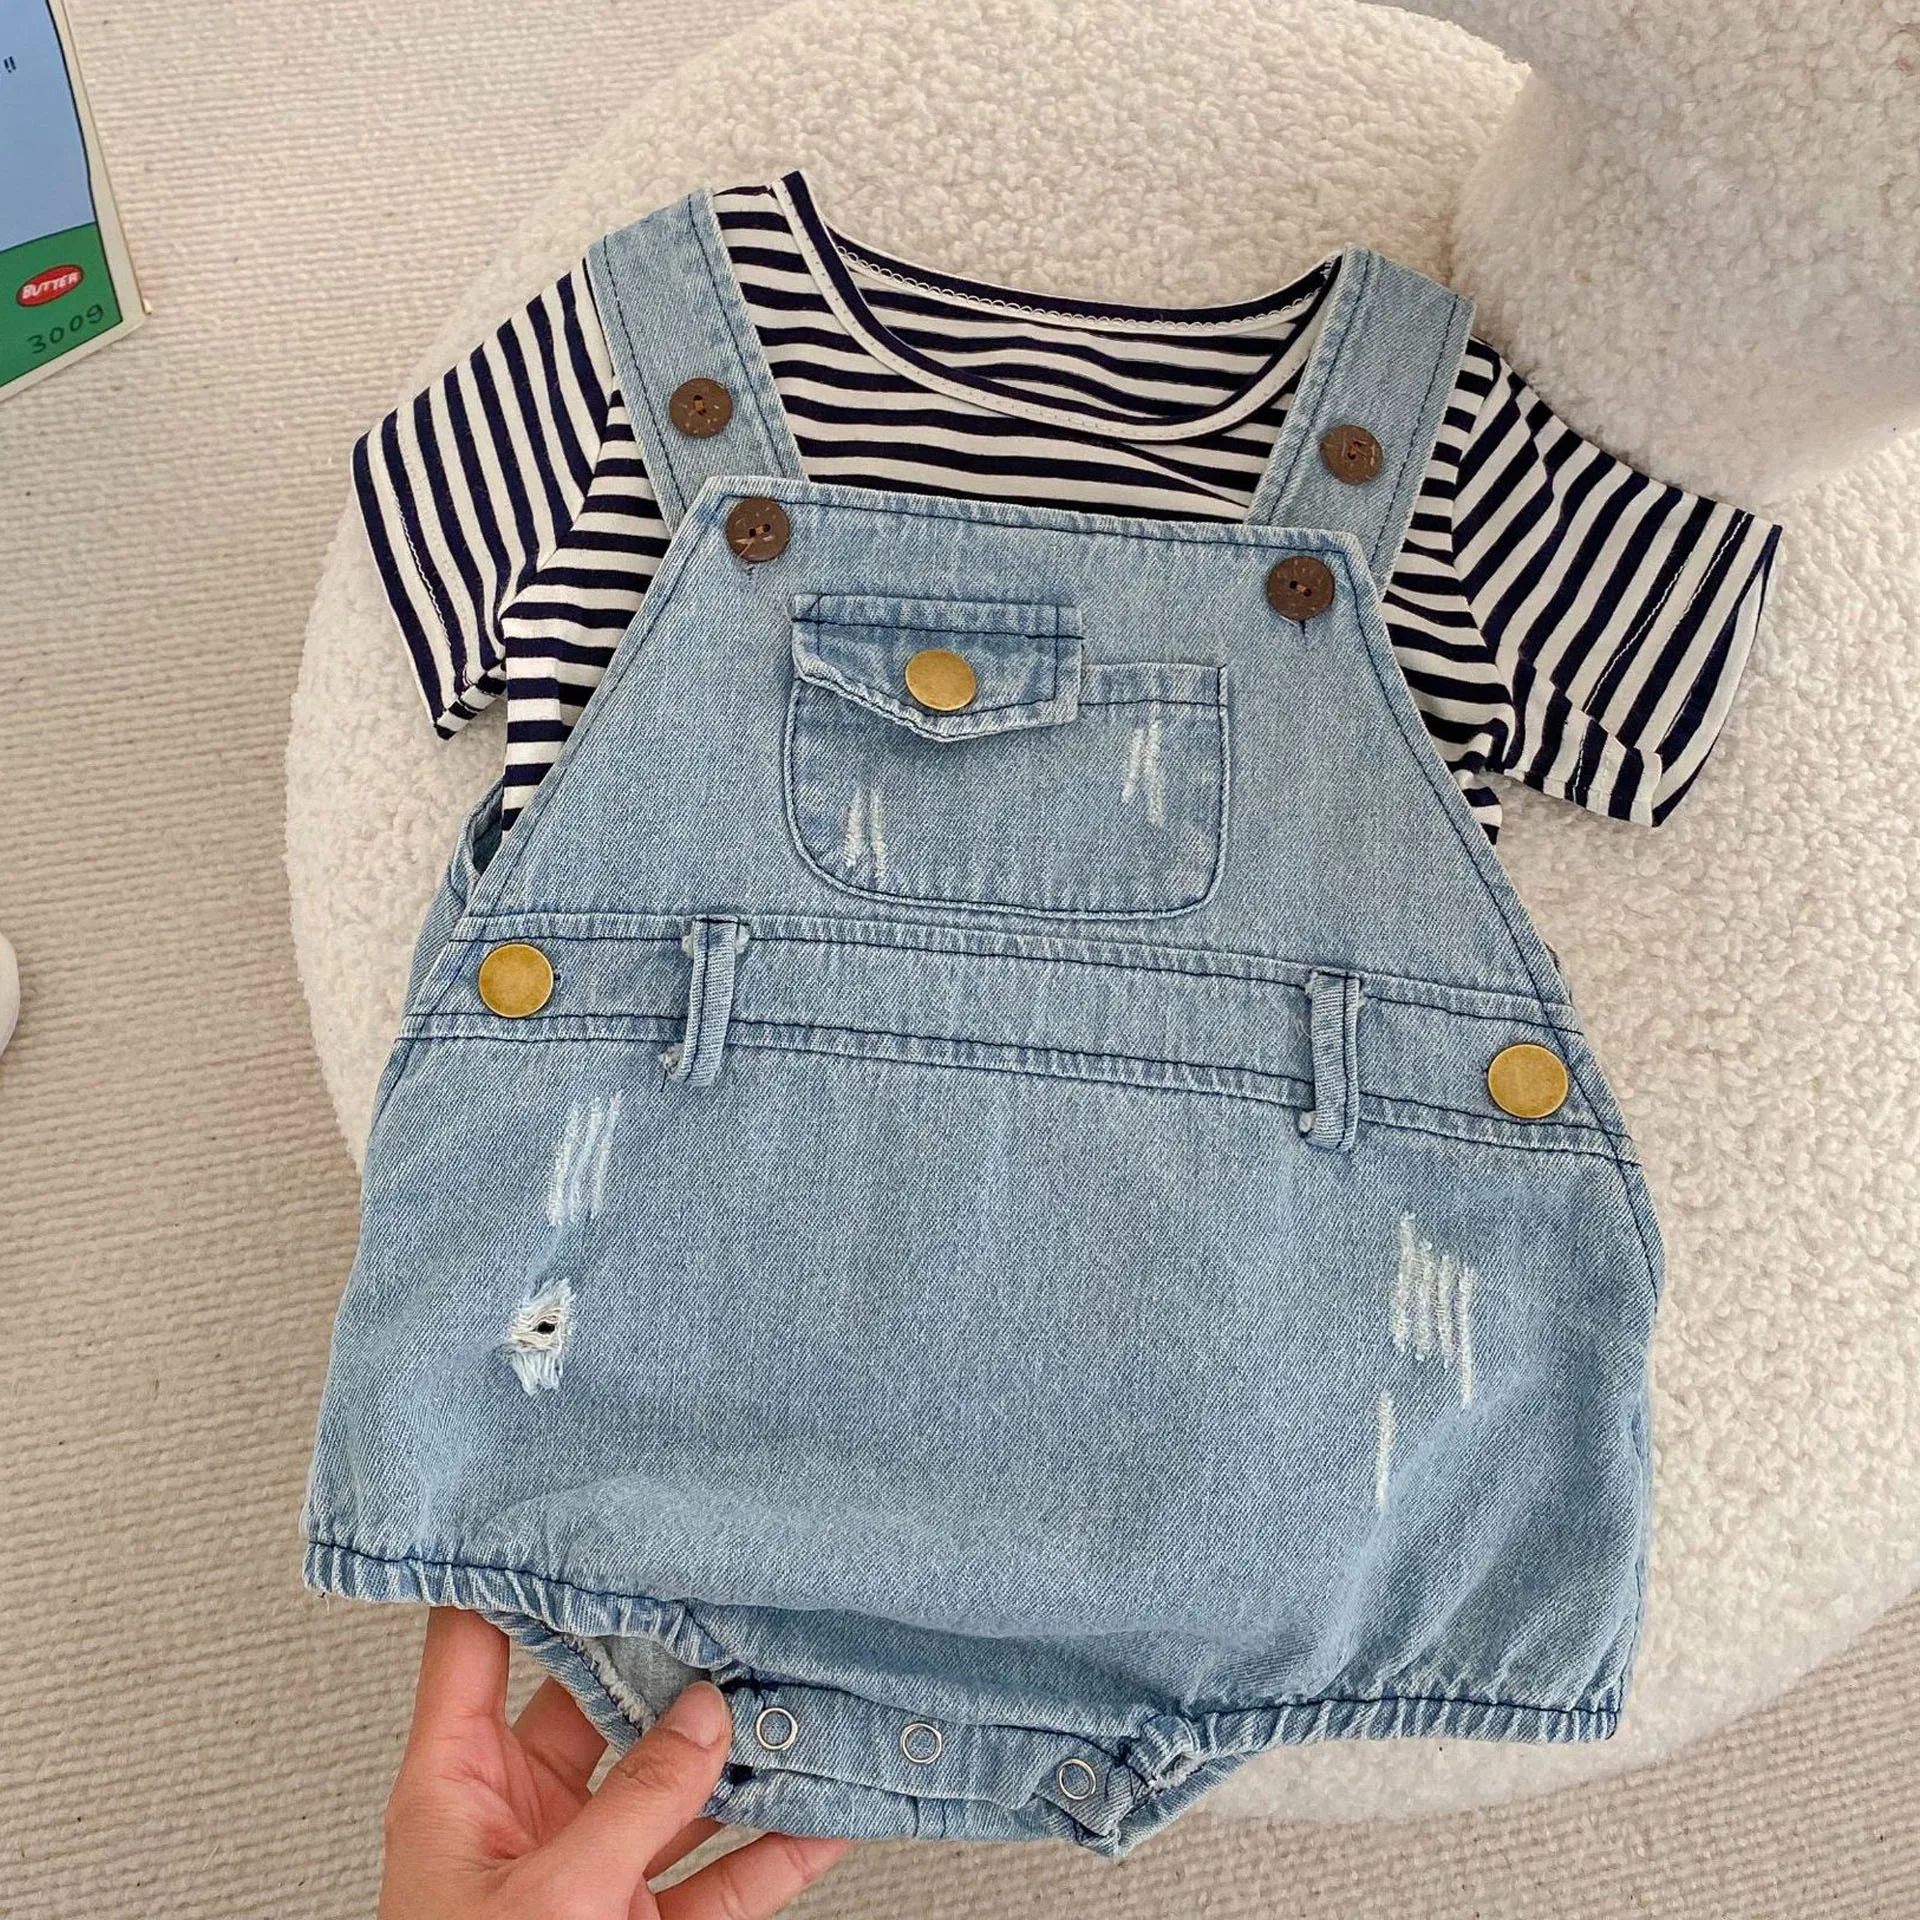 2023 Summer Denim Strap Romper For Kids Clothes Girls Striped T-Shirt Newborn Baby Sets Cute Toddler Boys 2Pcs Suit Baby Costume